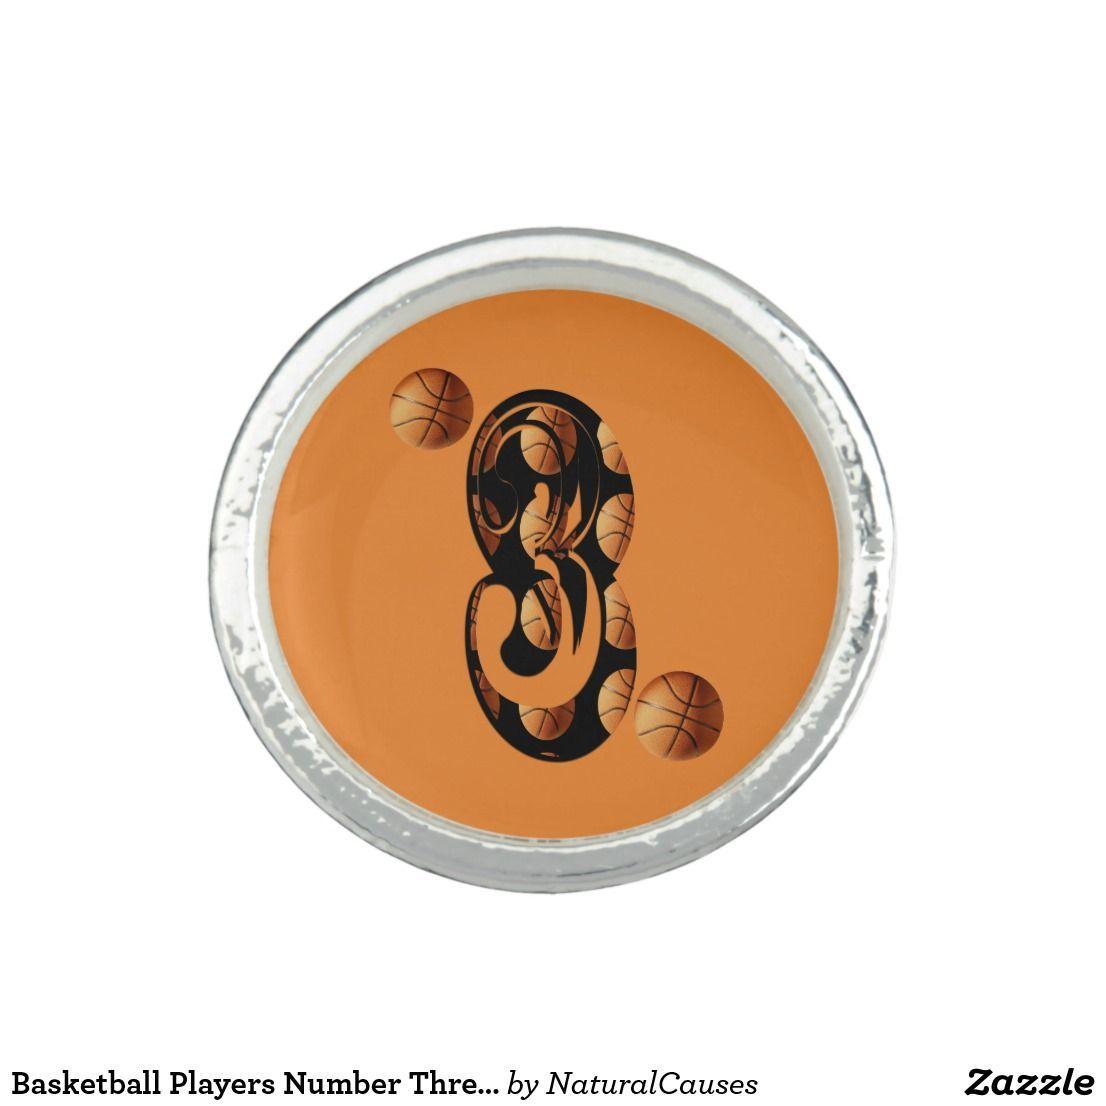 Three Orange Rings Logo - Basketball Players Number Three Picture Logo, Ring in 2019